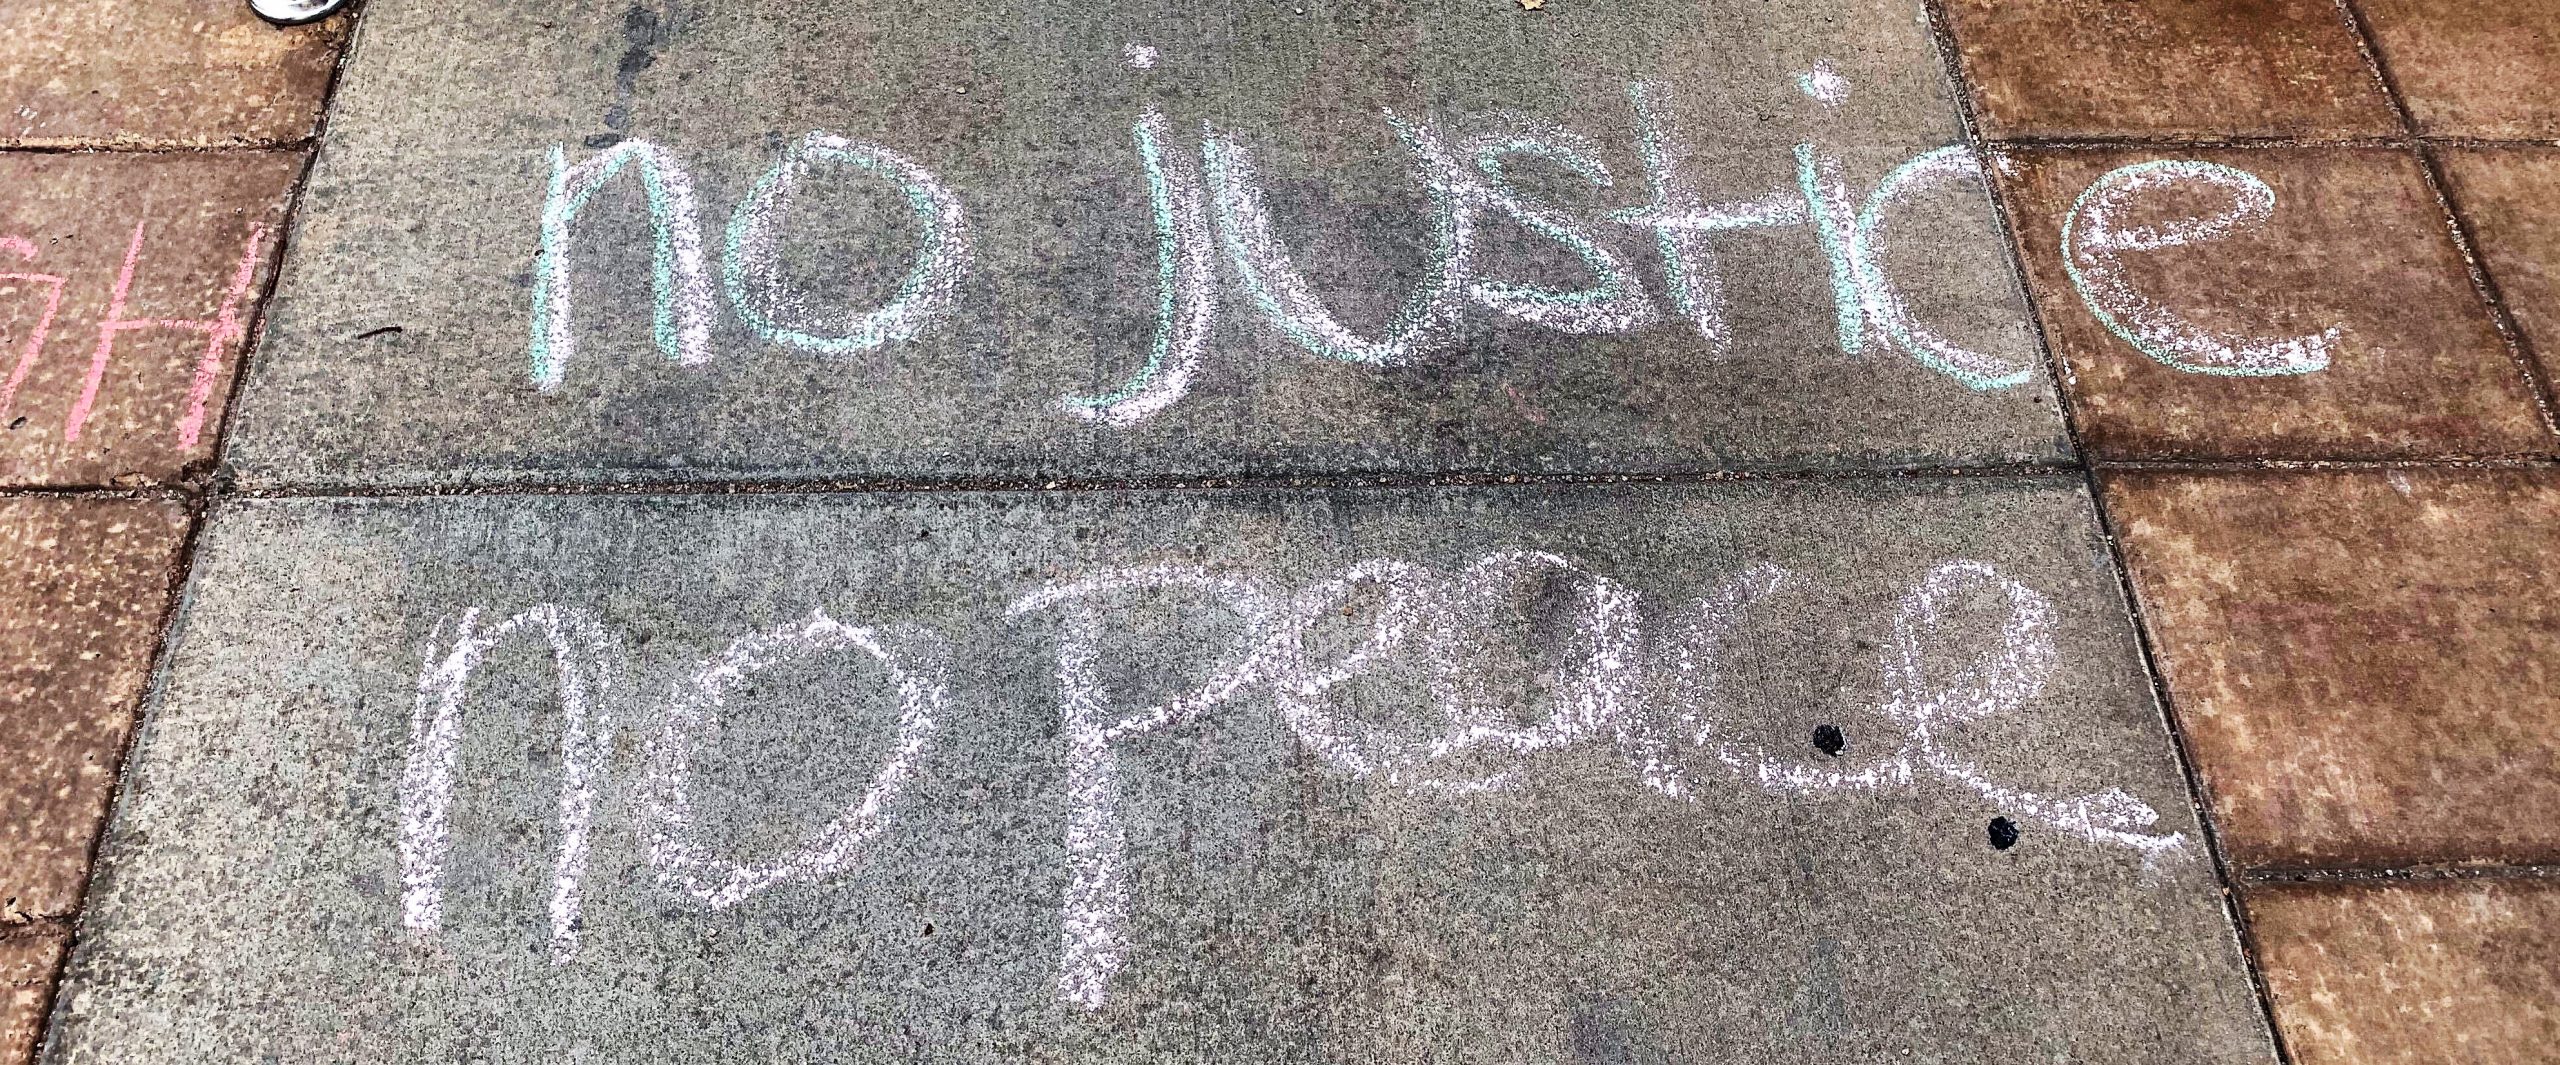 Chalk writing on sidewalk that says "no justice no peace"